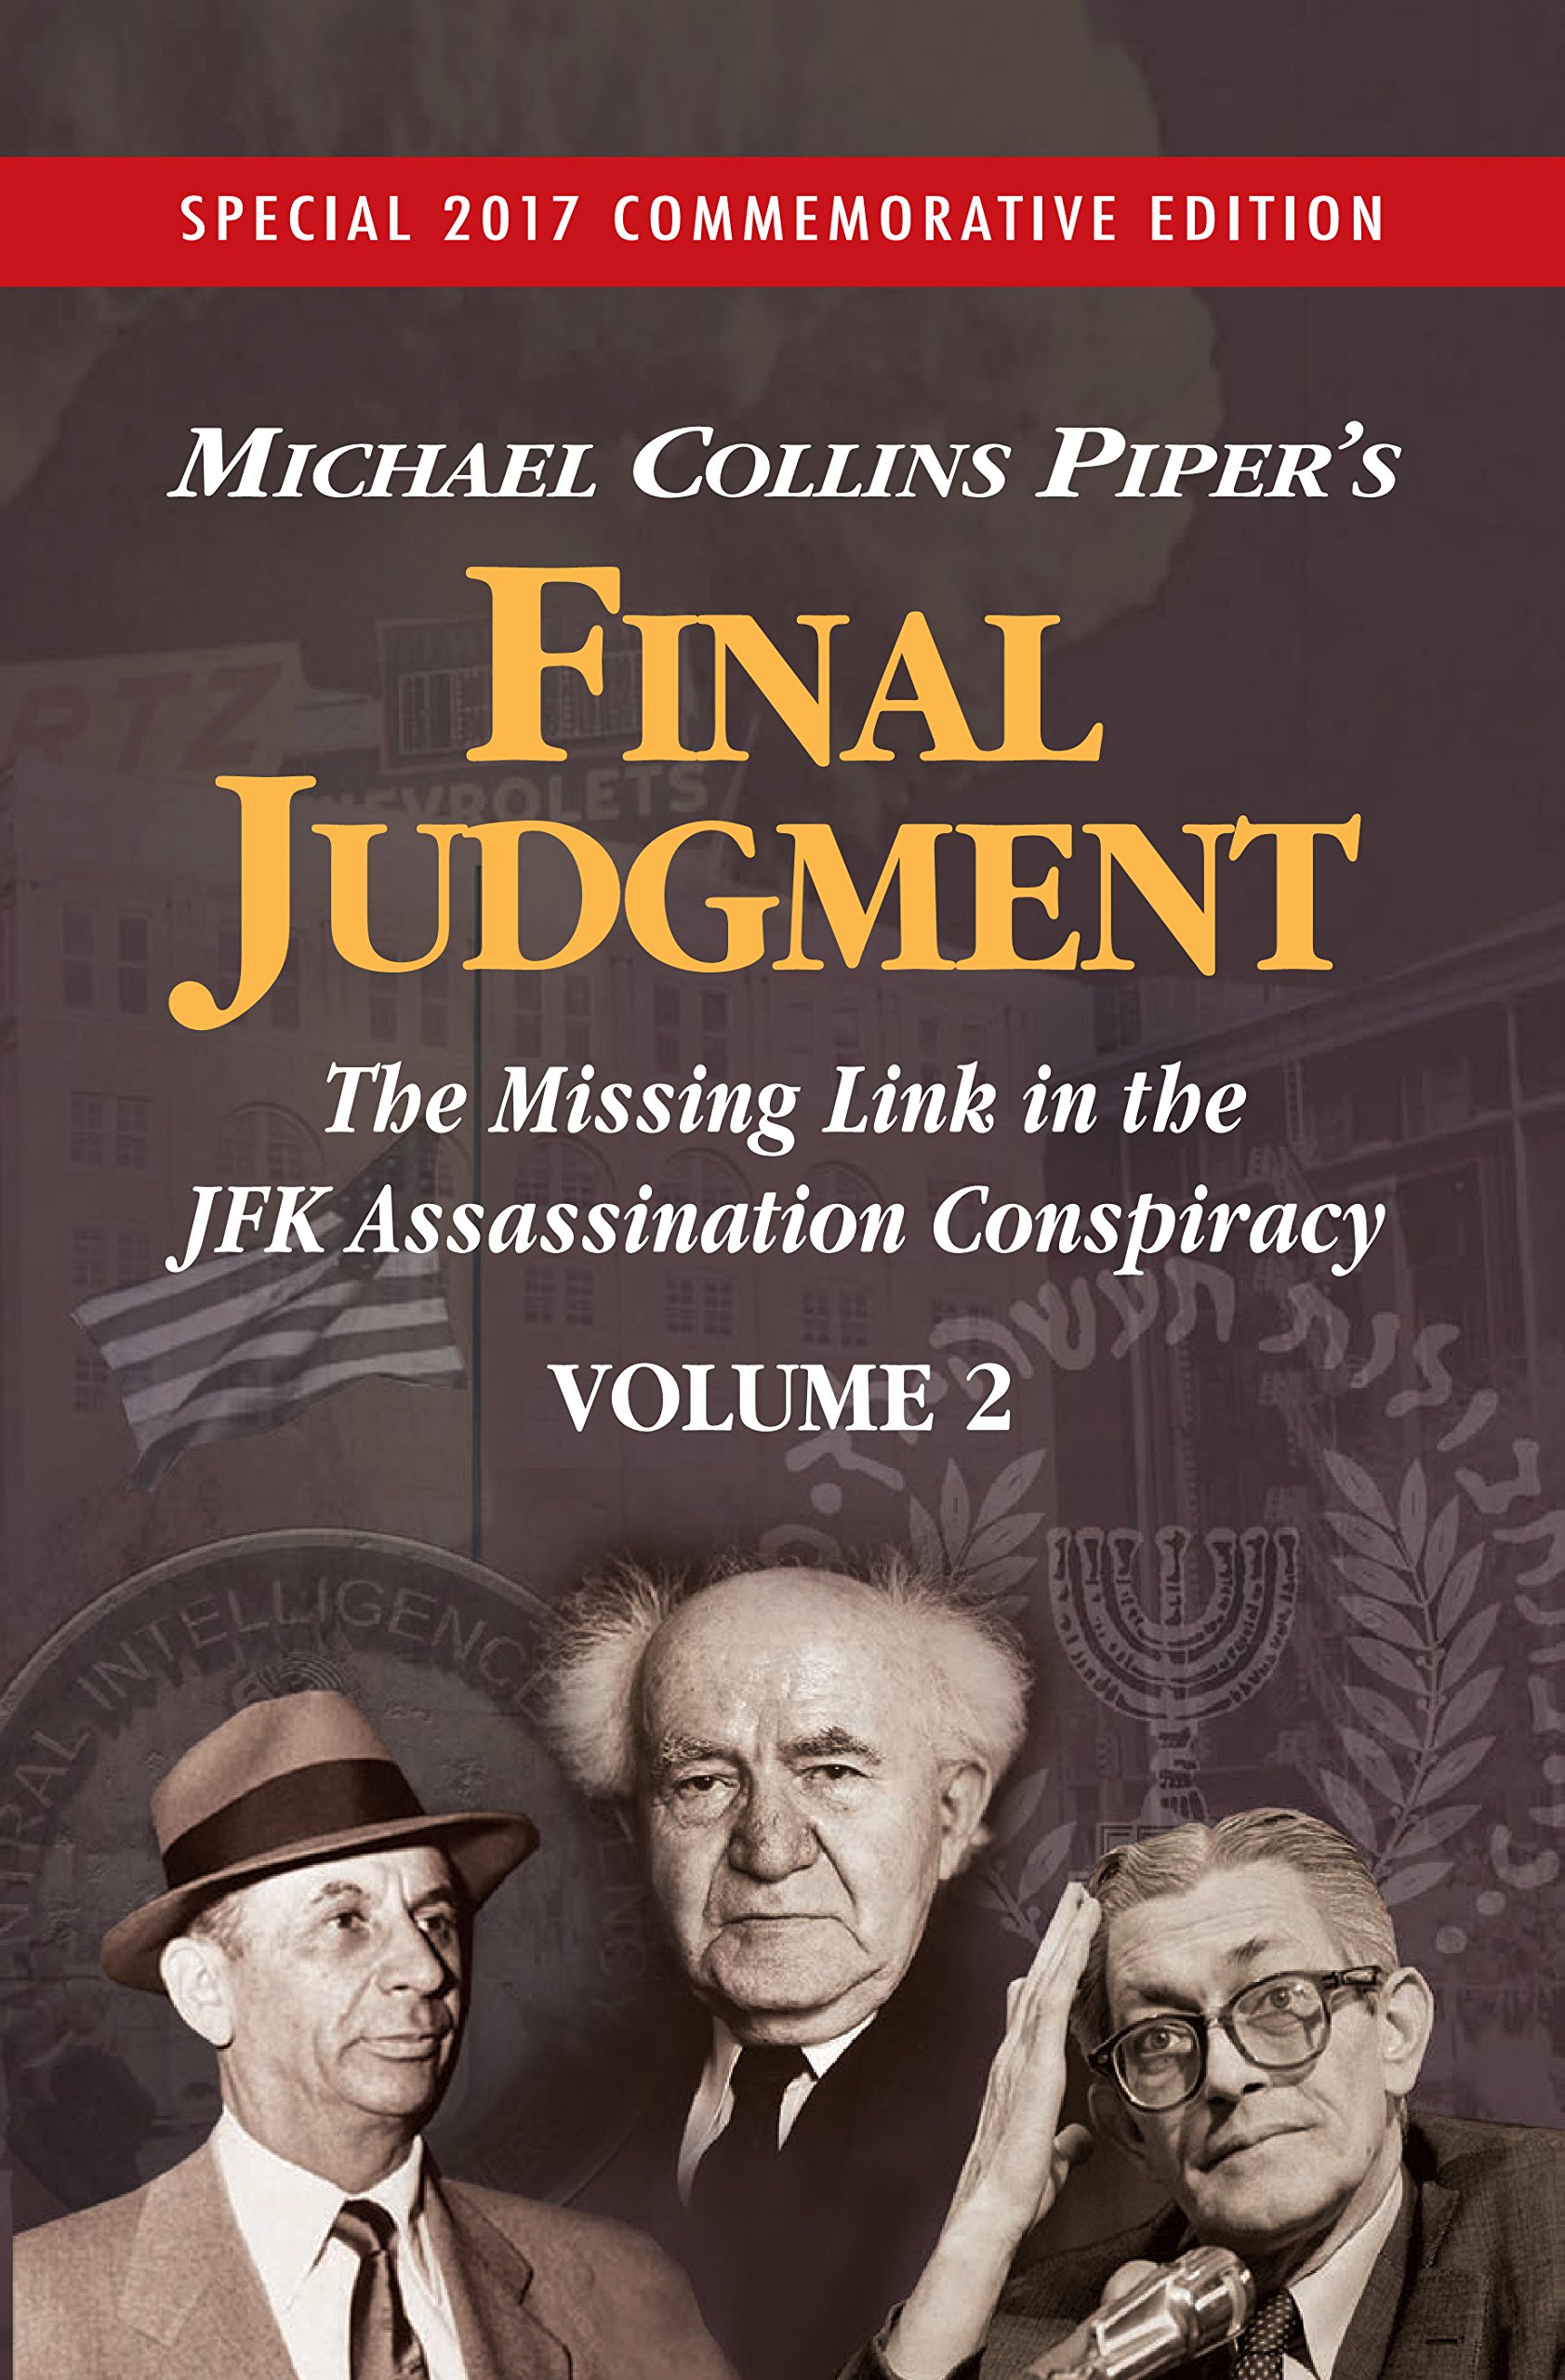 Final Judgment: The Missing Link in the JFK Assassination Conspiracy